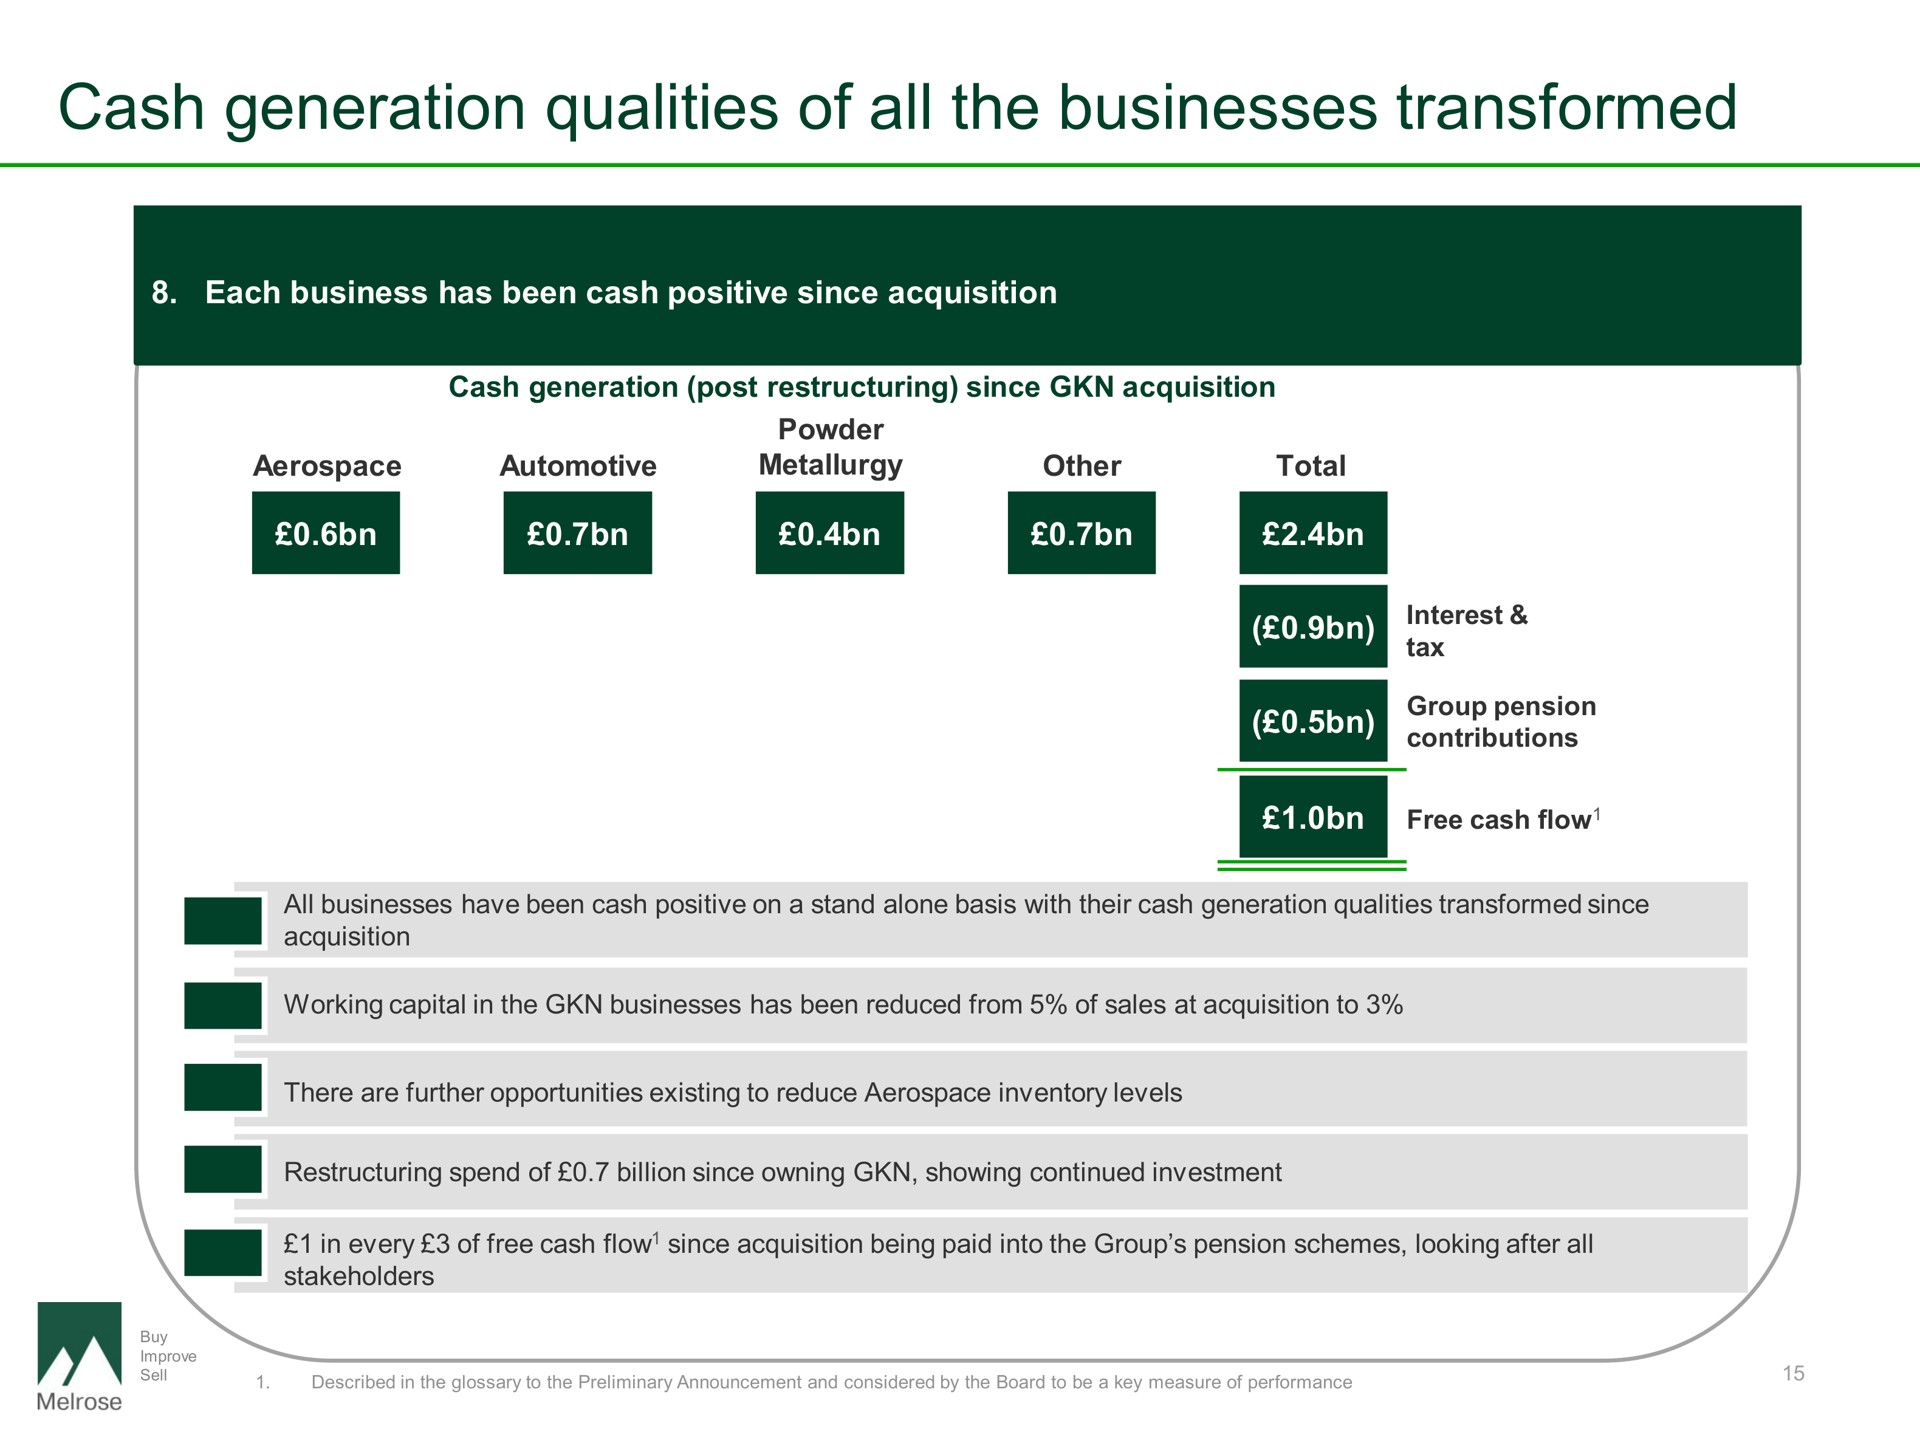 cash generation qualities of all the businesses transformed | Melrose